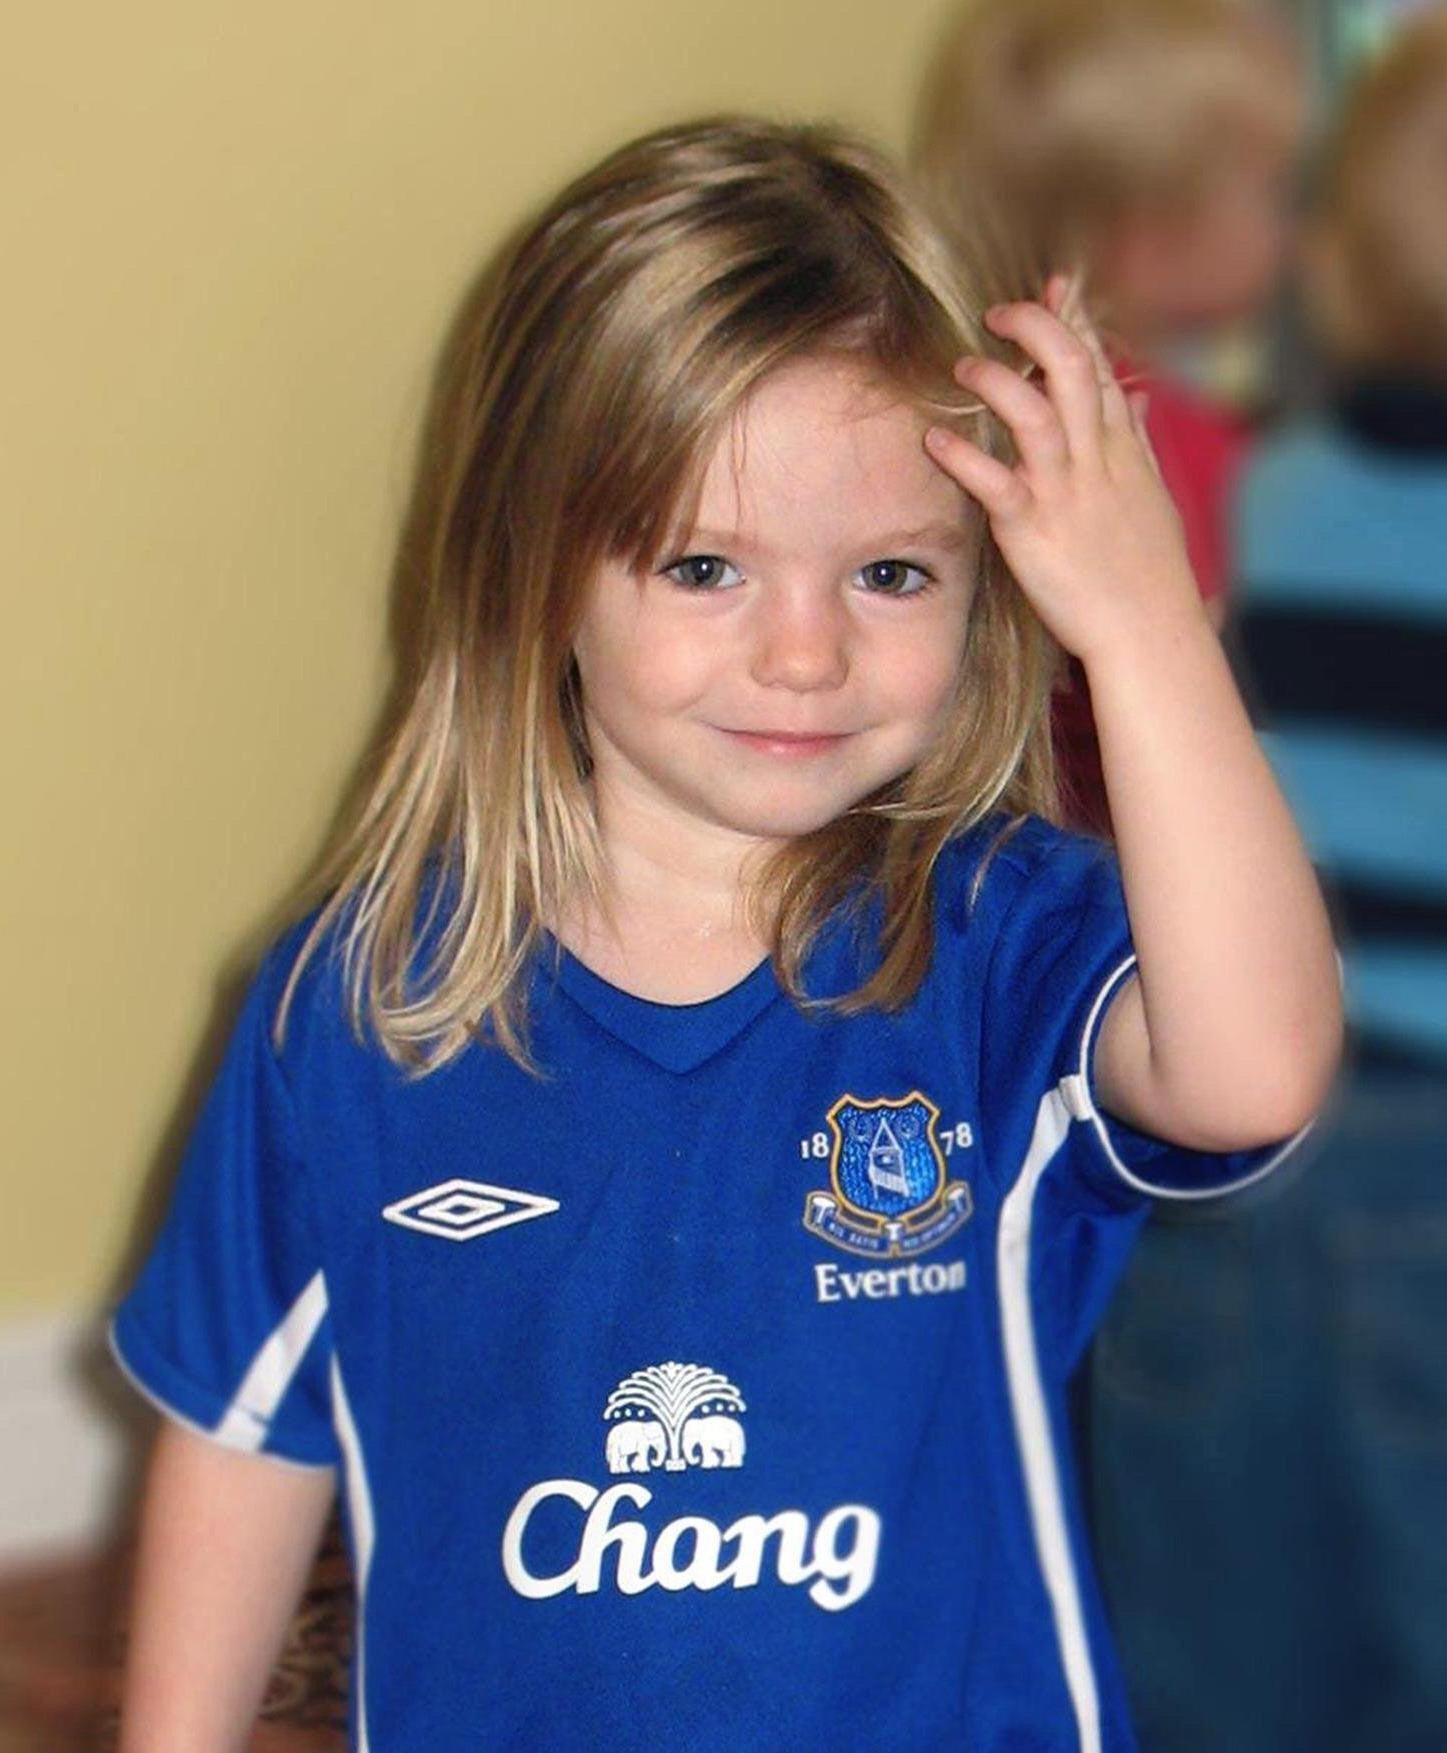 Madeleine was three years old when she disappeared on holiday in Portugal